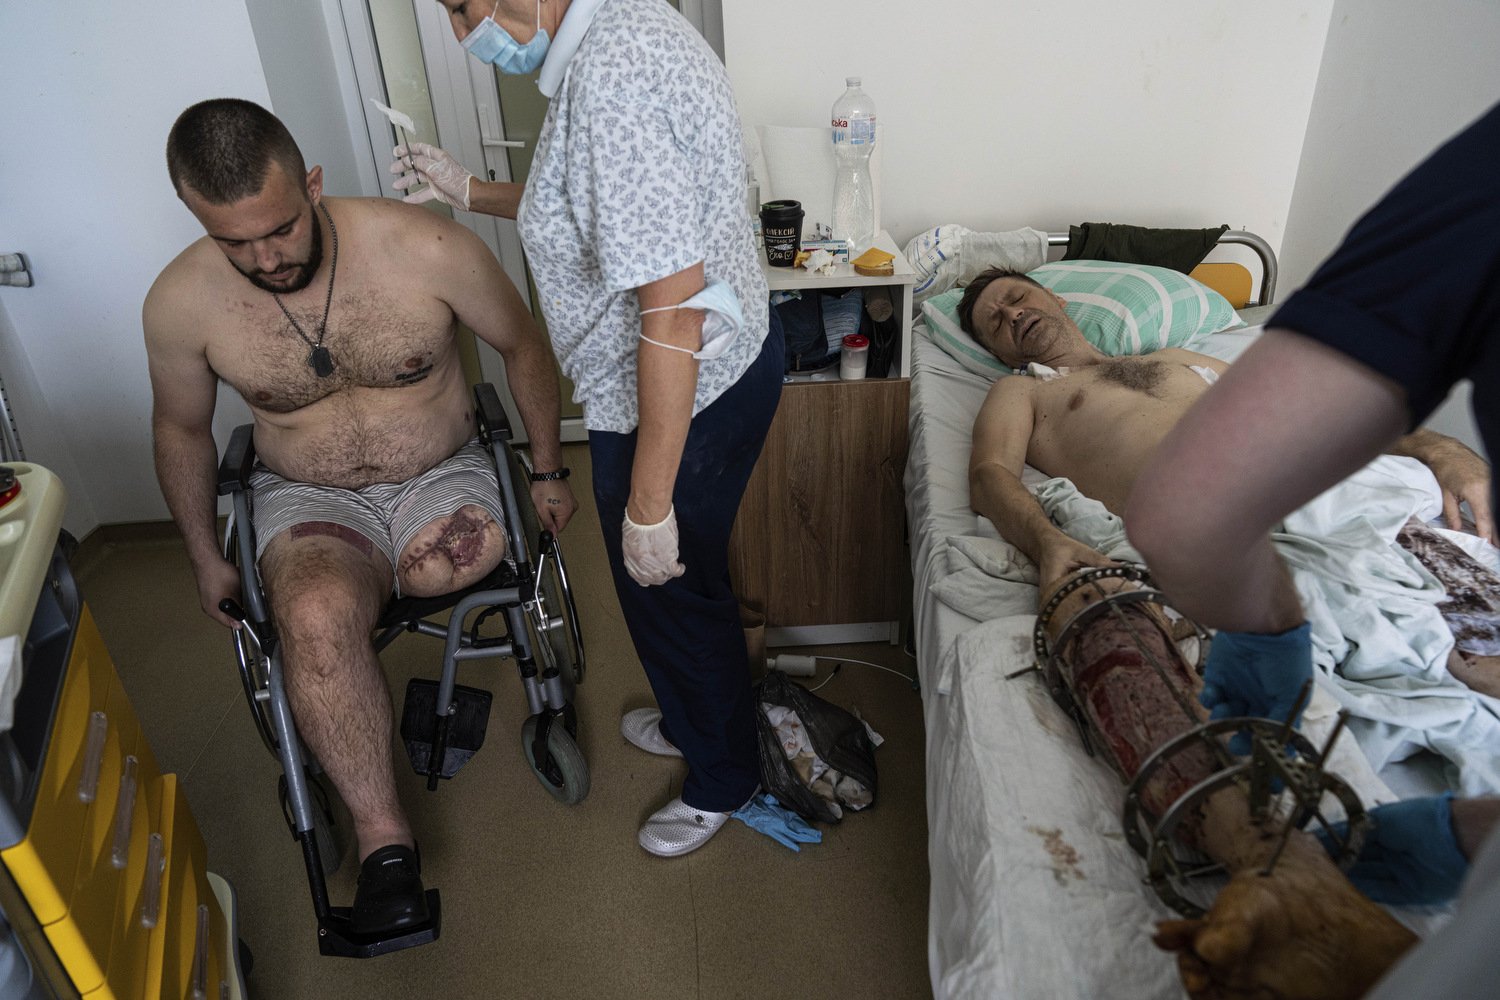  Medics bandage the wound of a Ukrainian serviceman at St. Panteleimon hospital in Lviv, Ukraine, Tuesday, July 25, 2023. At a rehabilitation hospital in the western city of Lviv, soldiers rely as much on each other as they do upon the physicians and